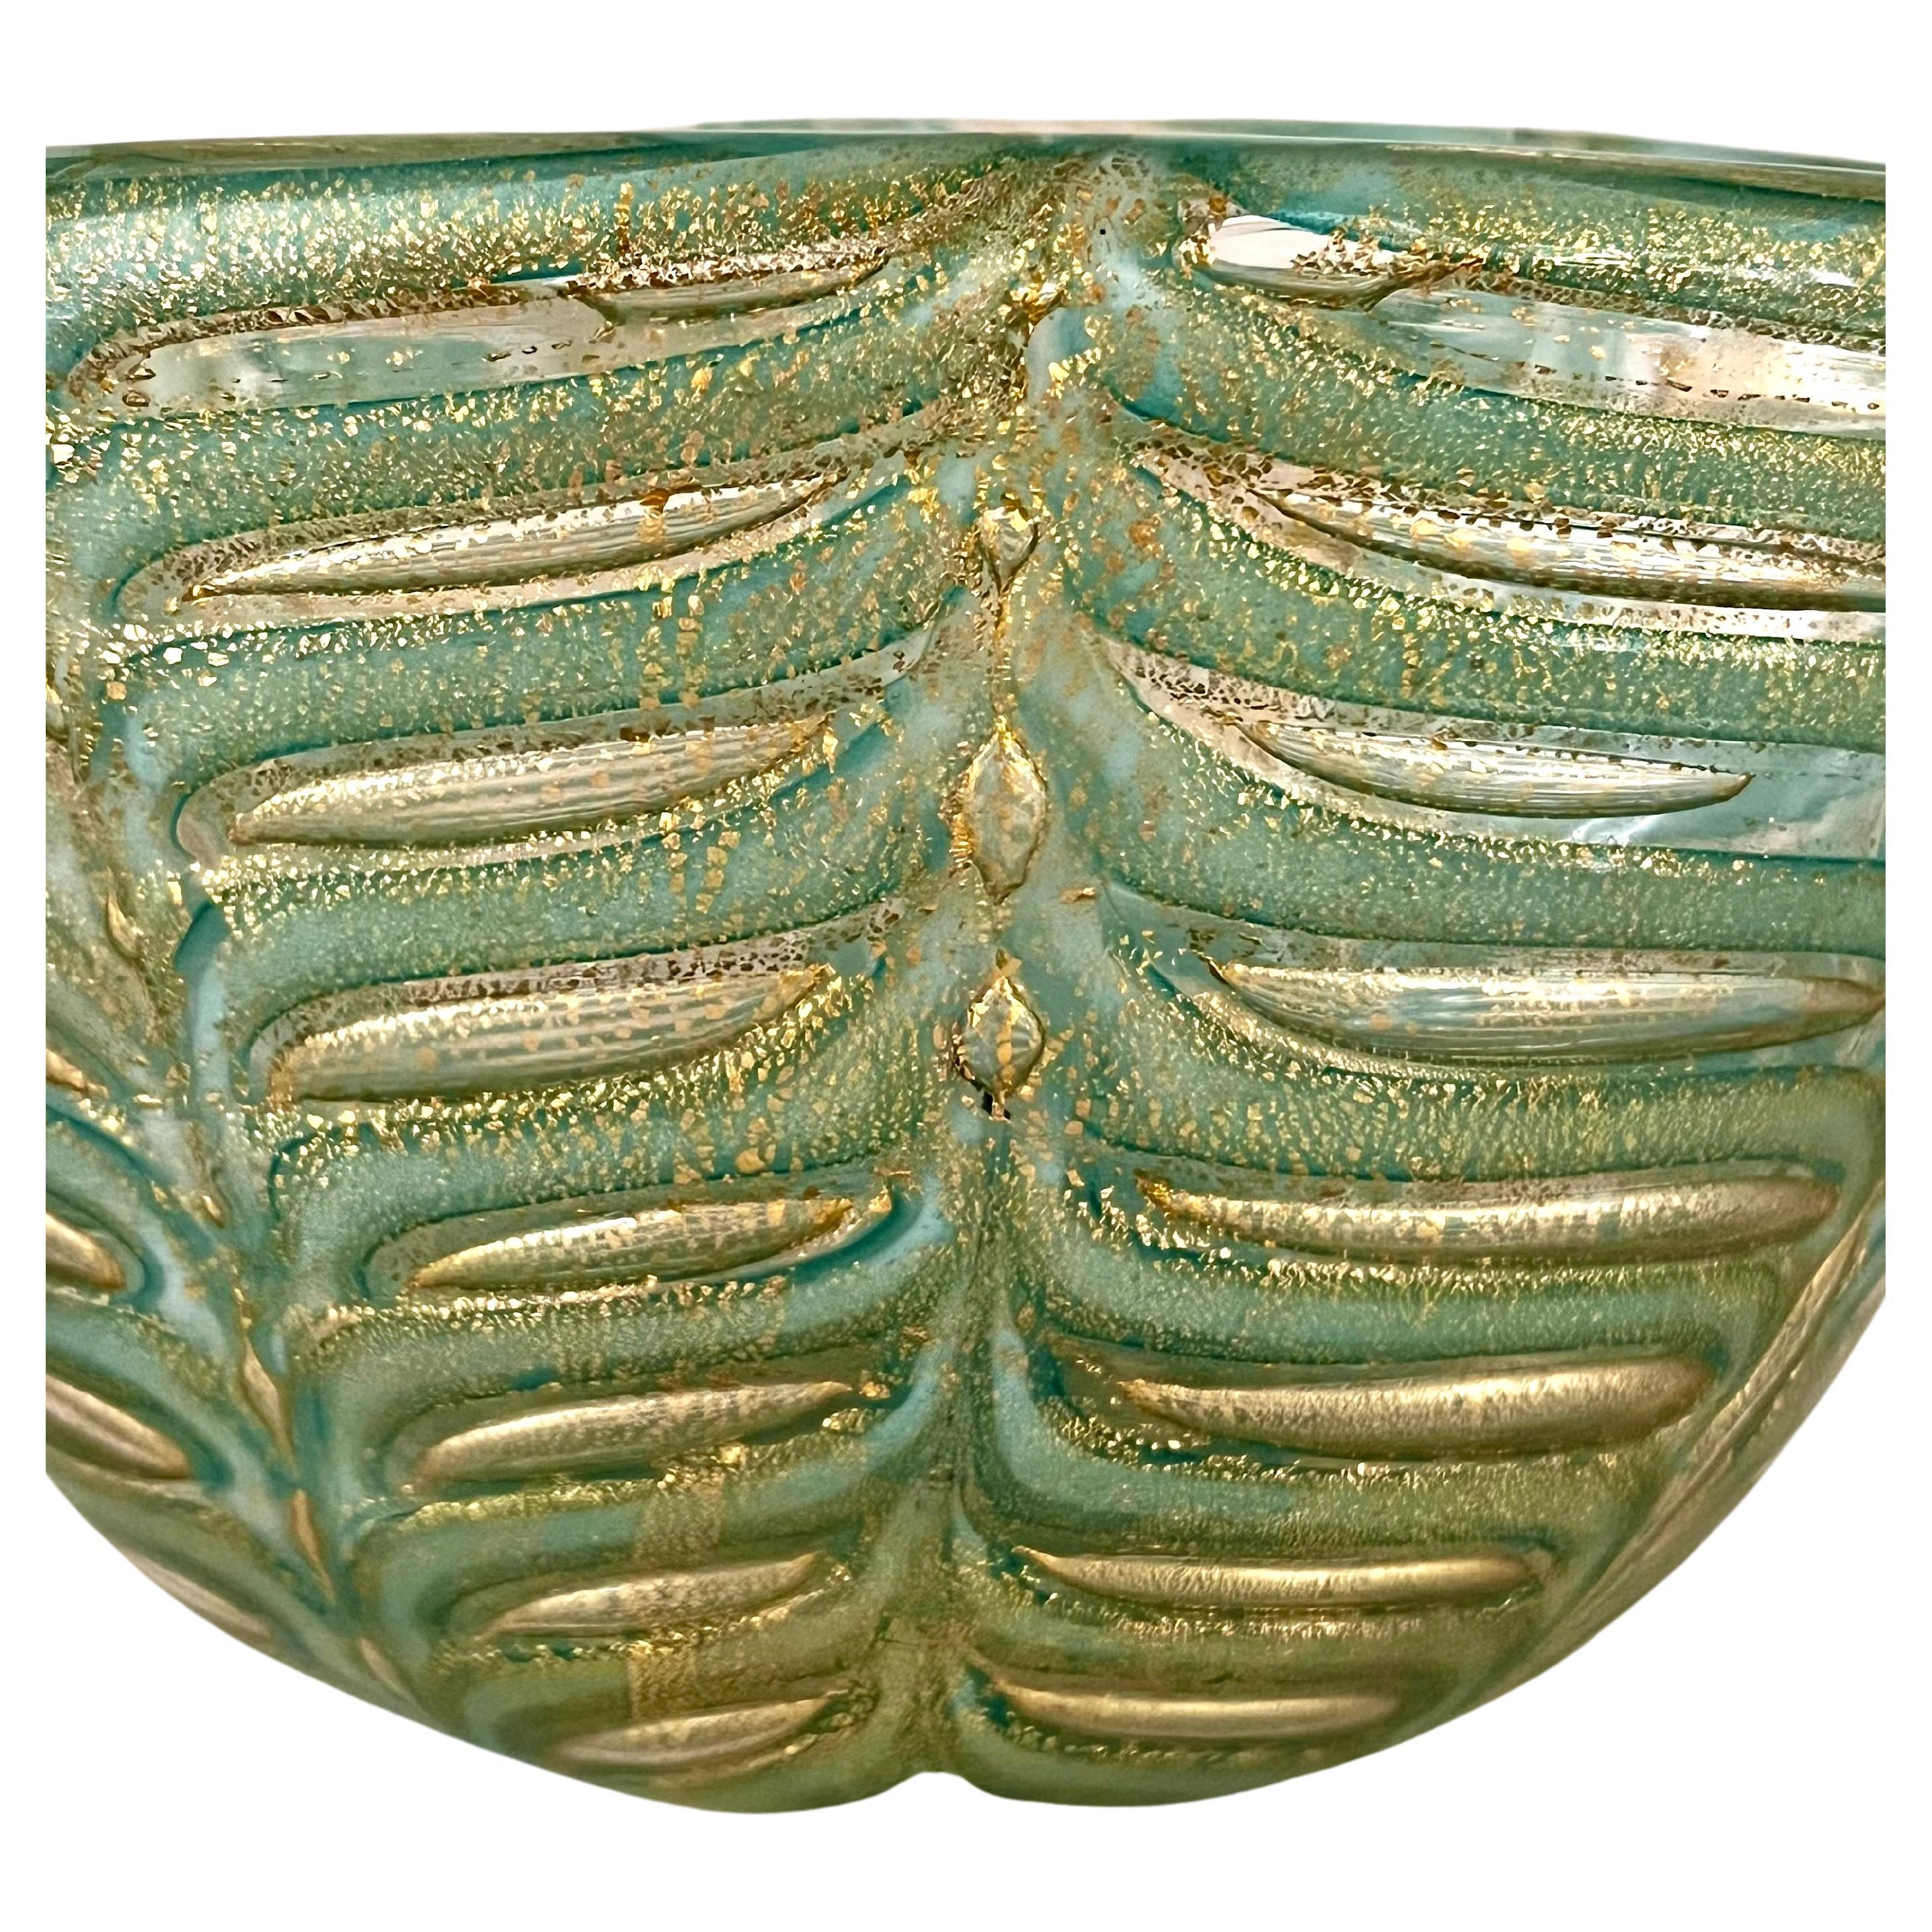 Stunning Green and Gold Leaf Murano Glass Bowl or Vase by Ercole Barovier.  With pure gold leaf this hand blown bowl sculpture is so beautiful in the Graffito technique due to the gold inclusions. And the master himself!
Perfect for consoles, coffee